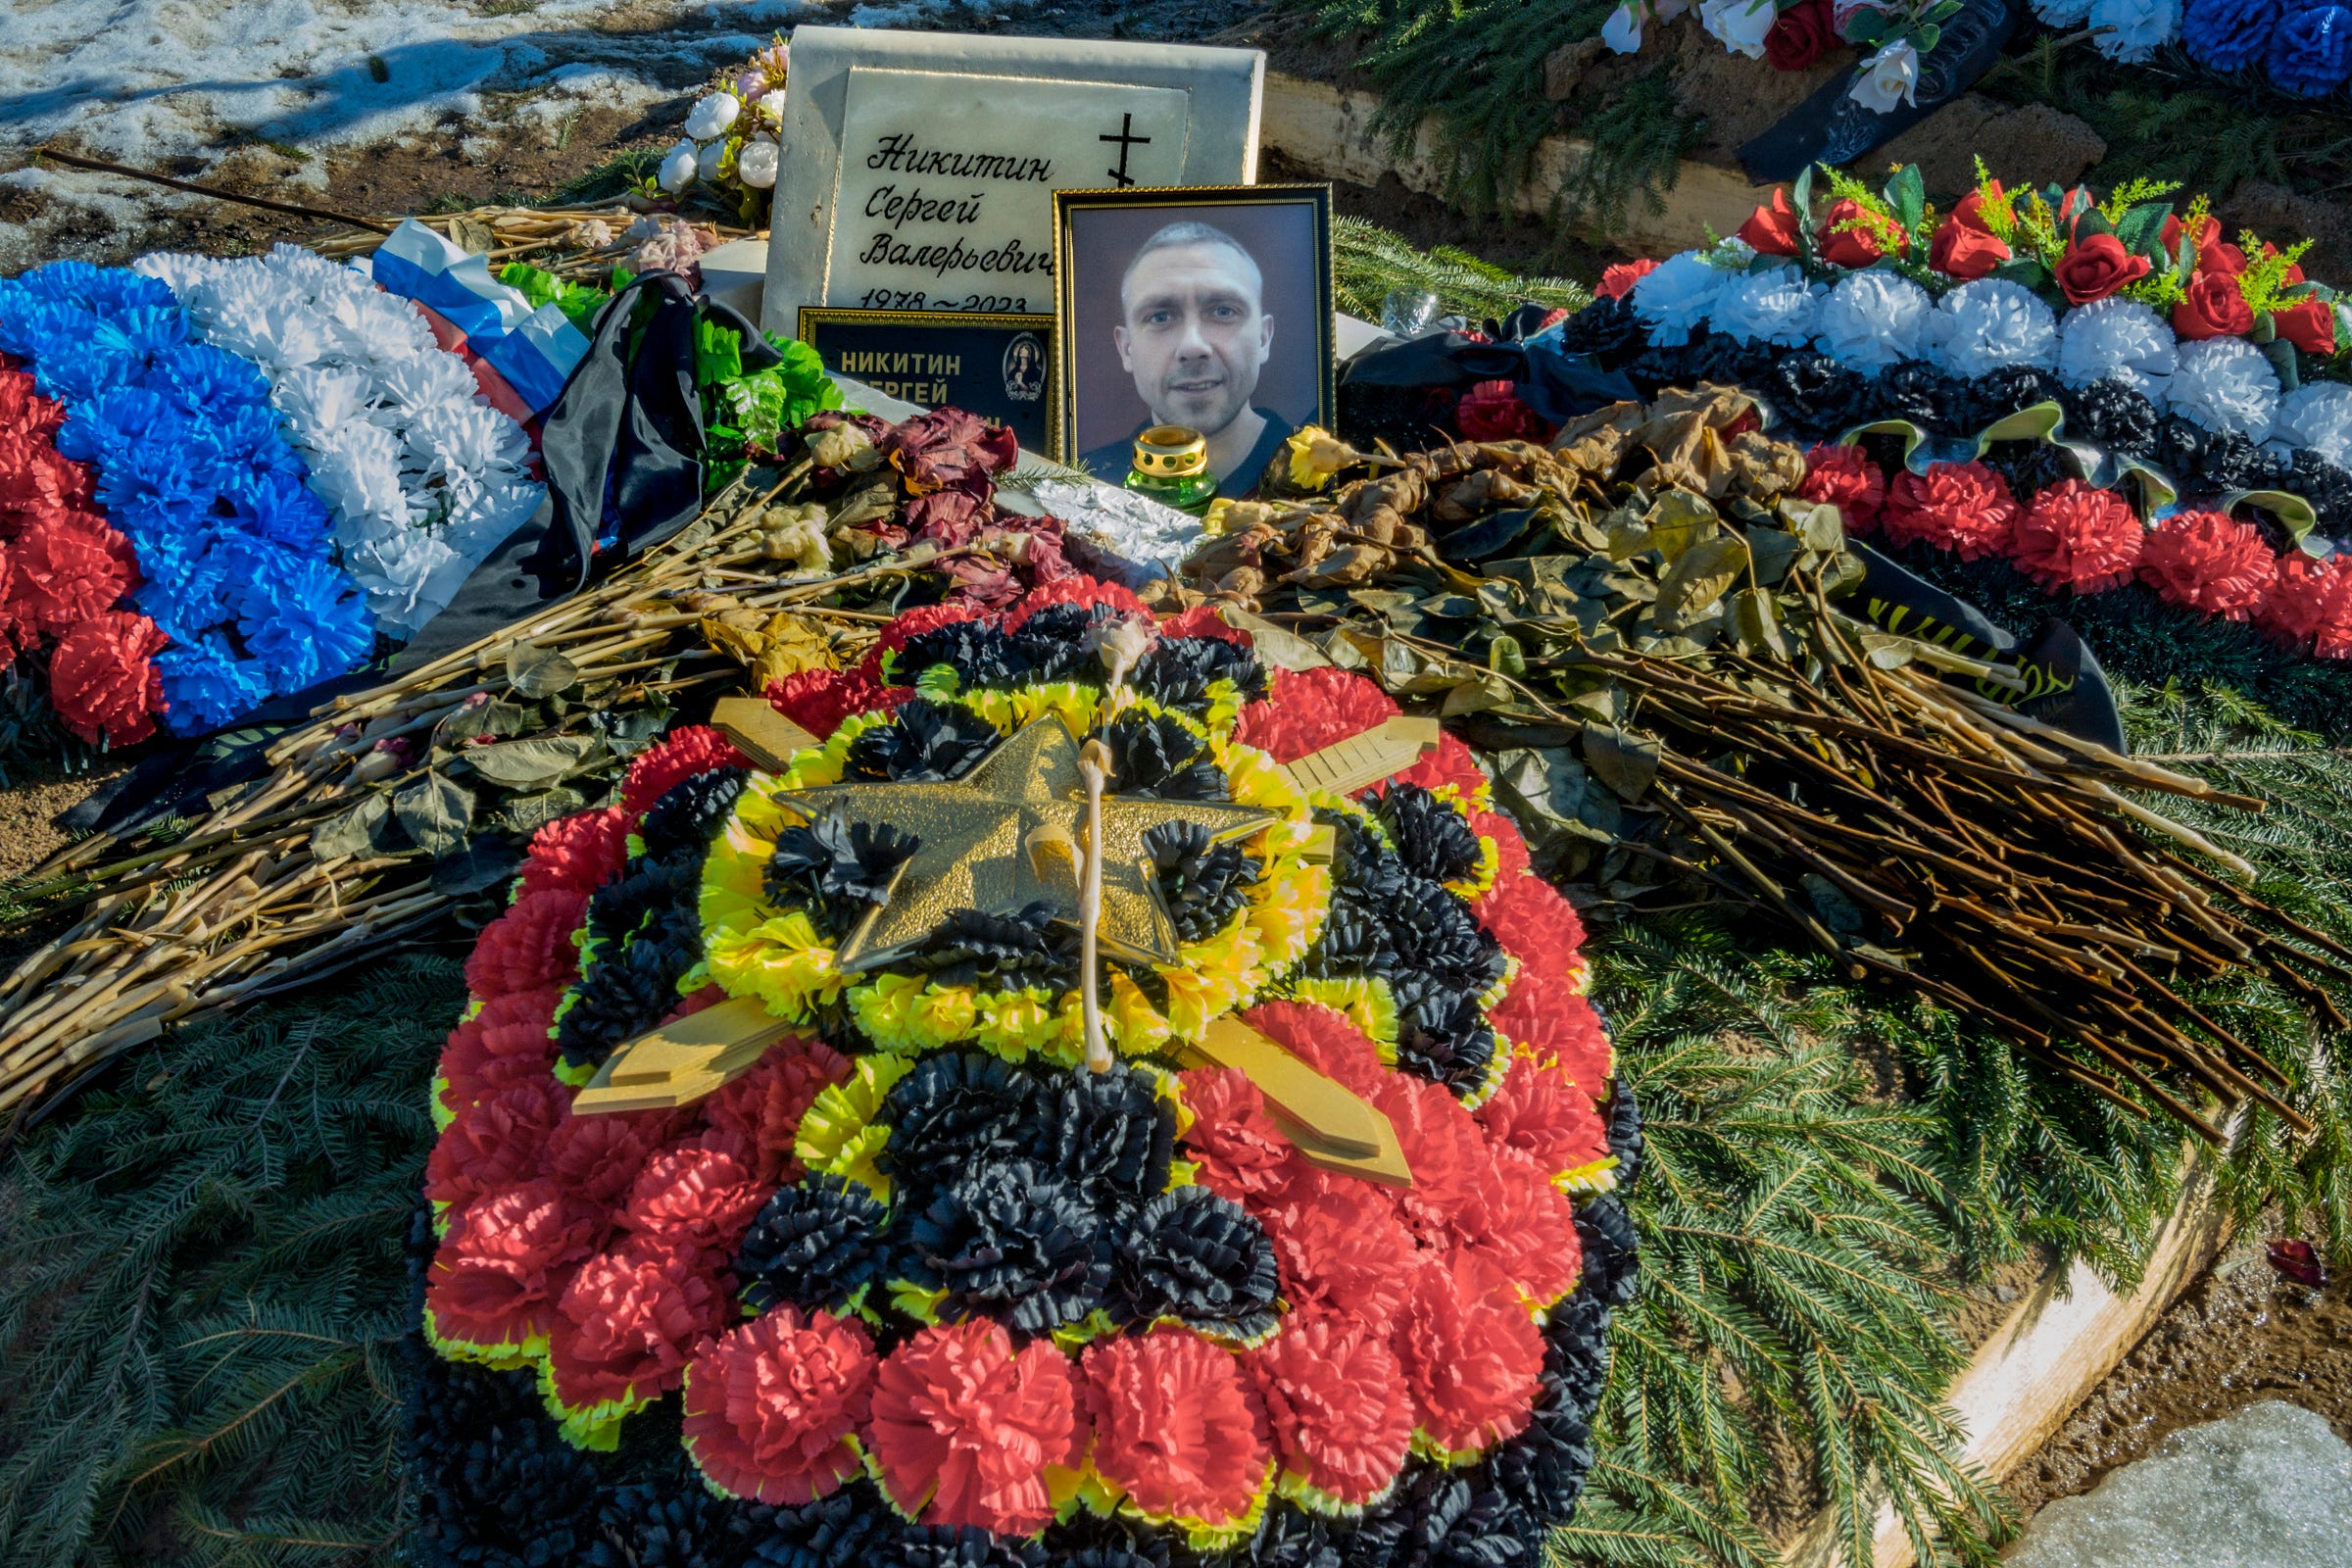 In the Beloostrovsky cemetery in Saint Petersburg, Russia, a characteristic crown of flowers of the Wagner mercenaries group is adorning the grave of one of its member.